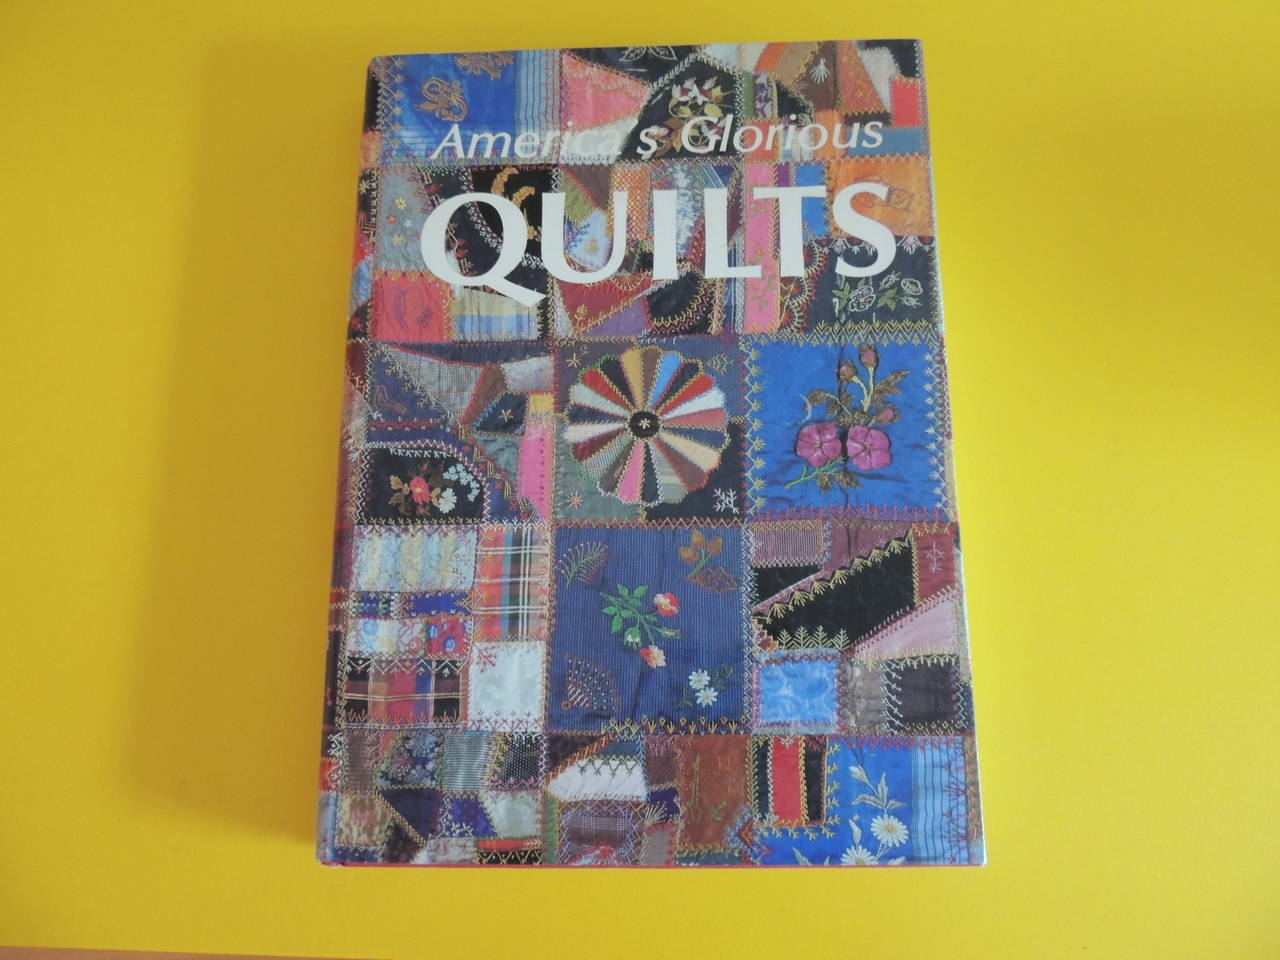 Hardcover America's quilt book with dust jacket. 320 pages. oversize book.
Size: 11